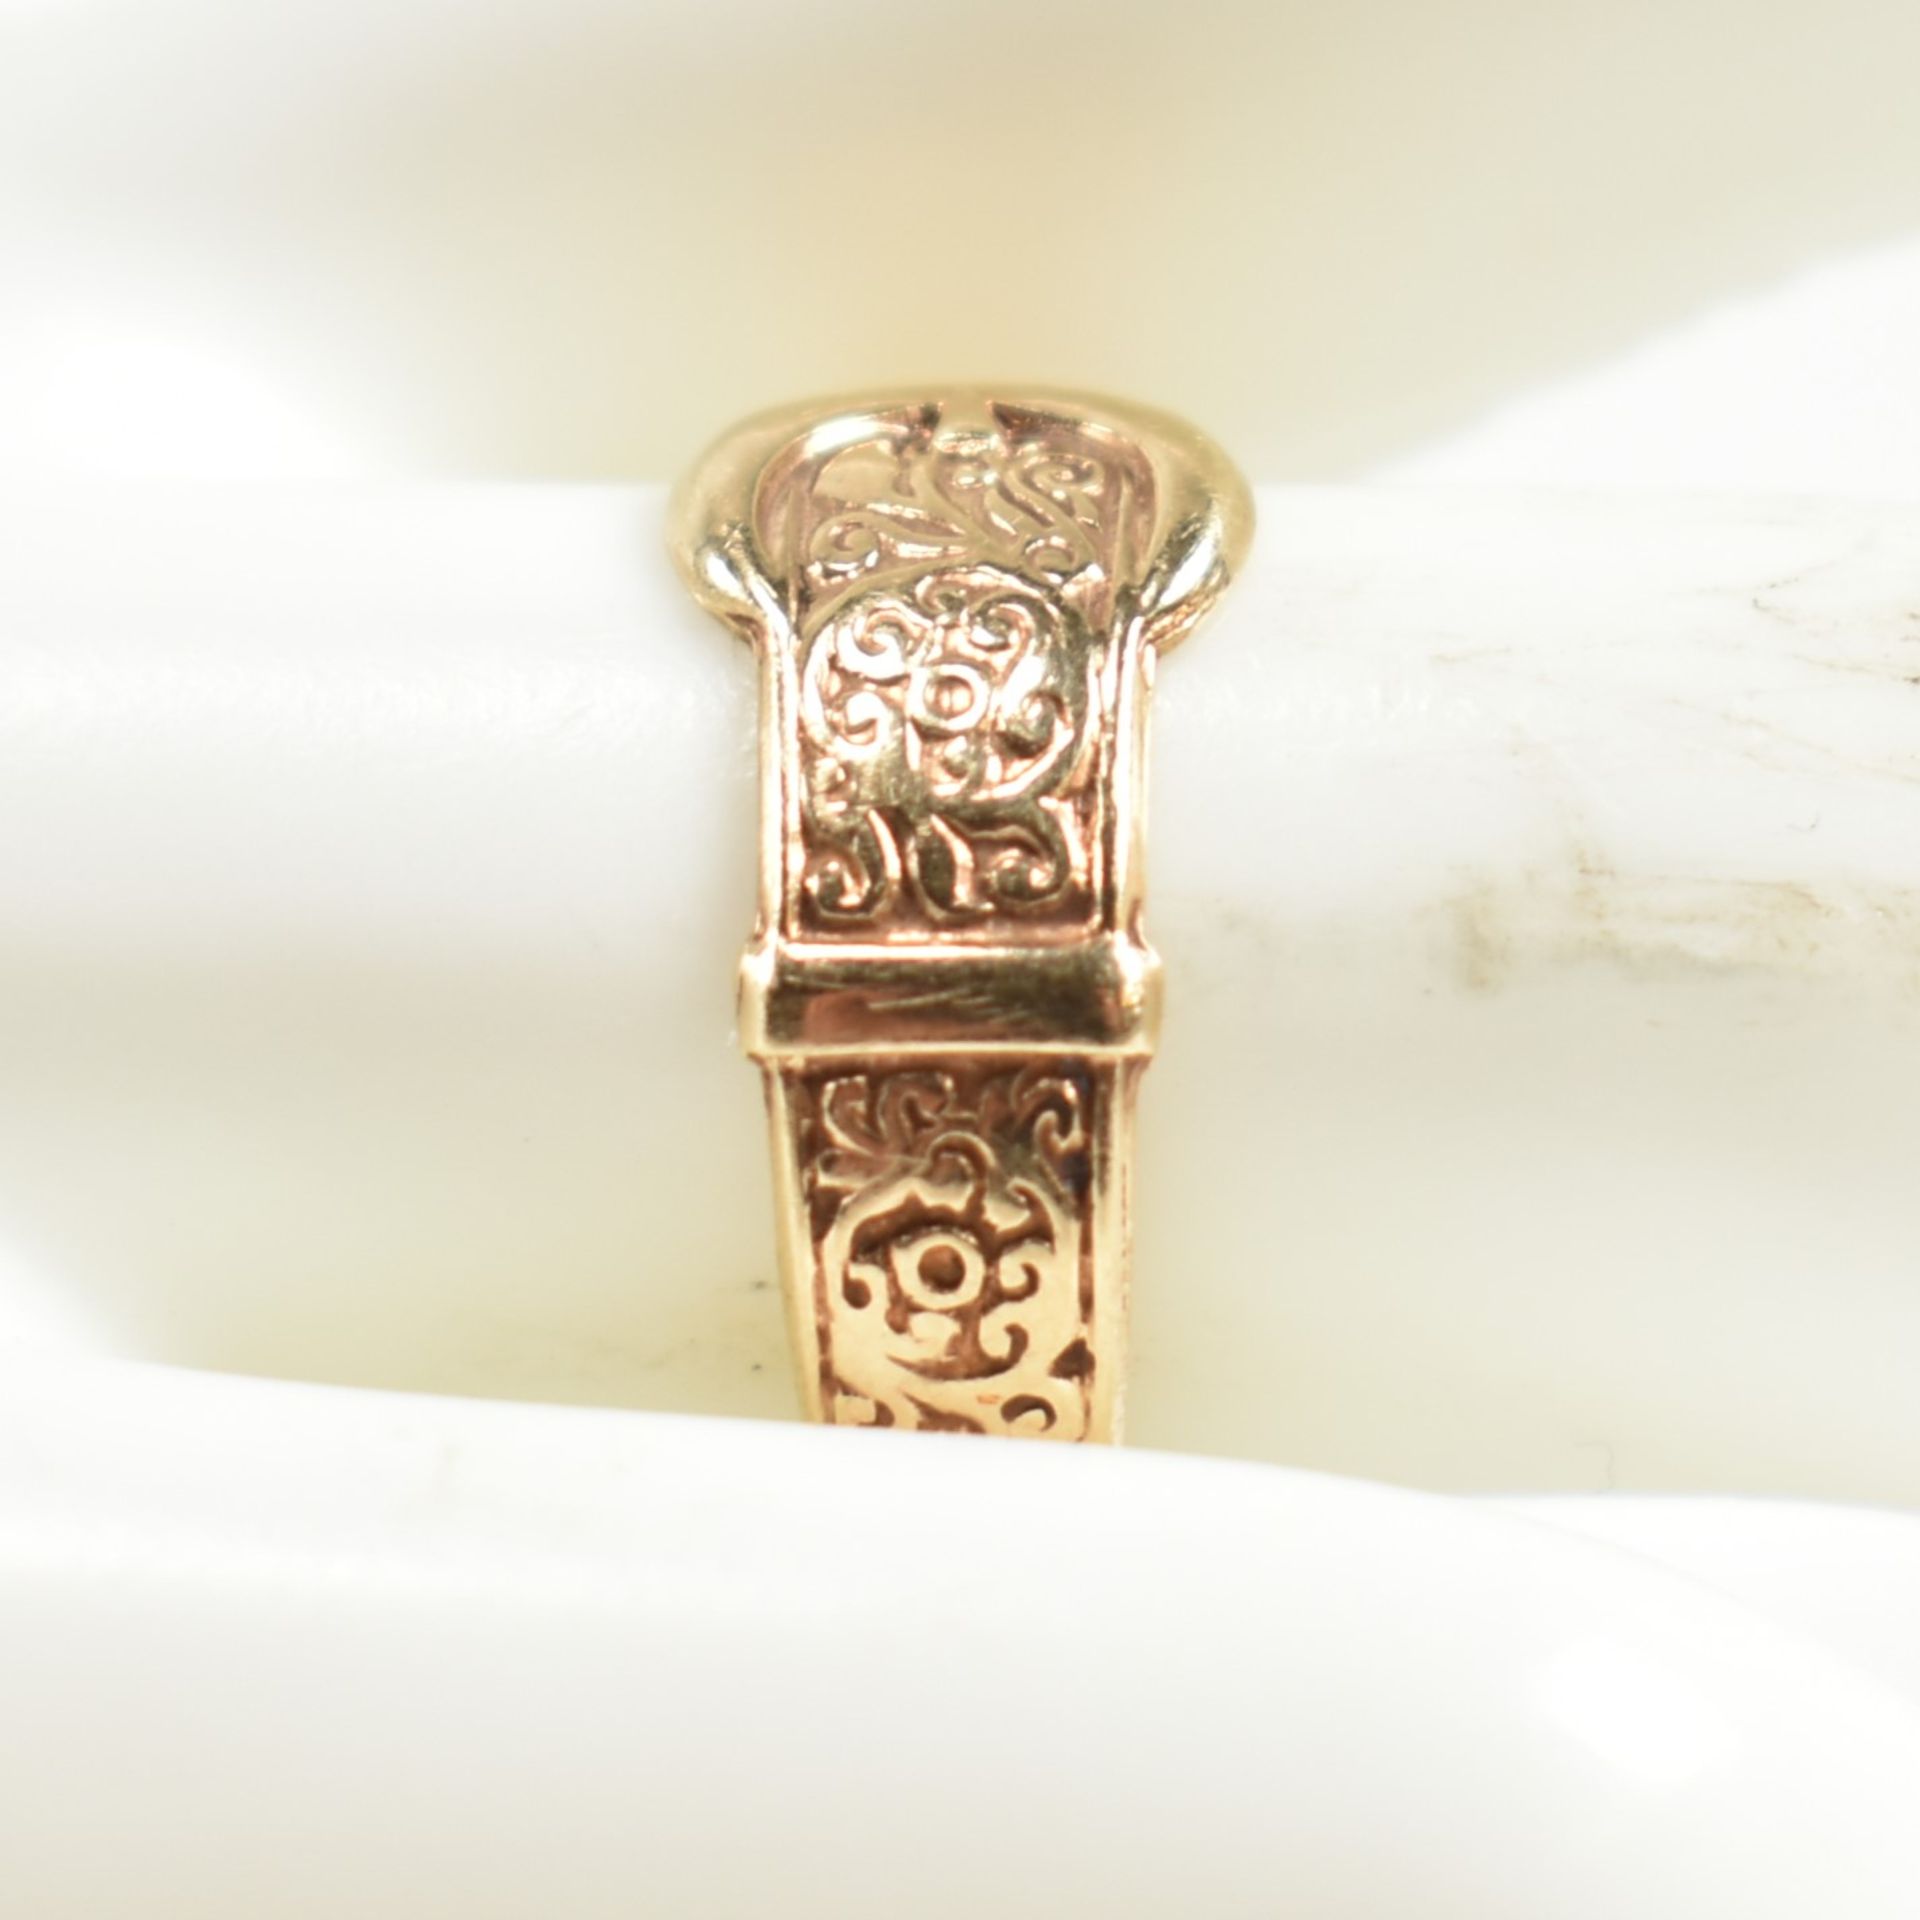 HALLMARKED 9CT GOLD ENGRAVED BELT BUCKLE RING - Image 9 of 9